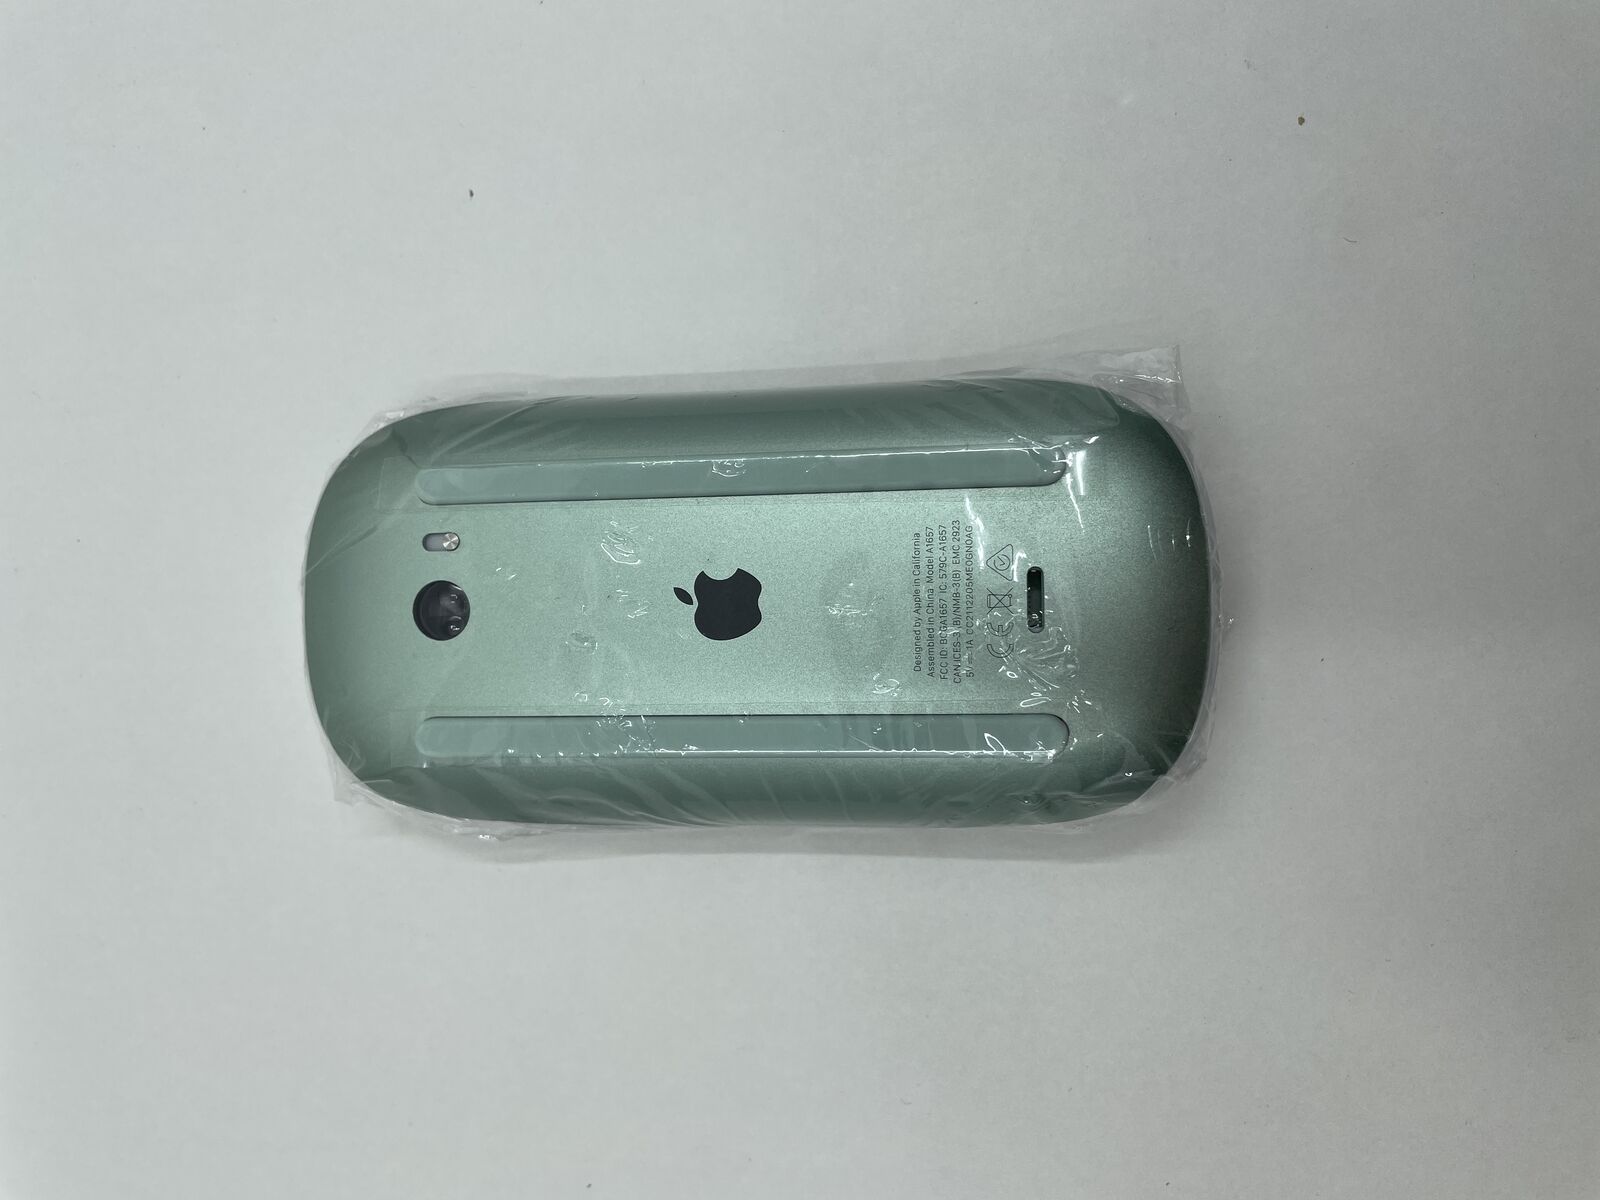 Apple Magic A1657 (MLA02ZM/A) Wireless Mouse for sale online | eBay